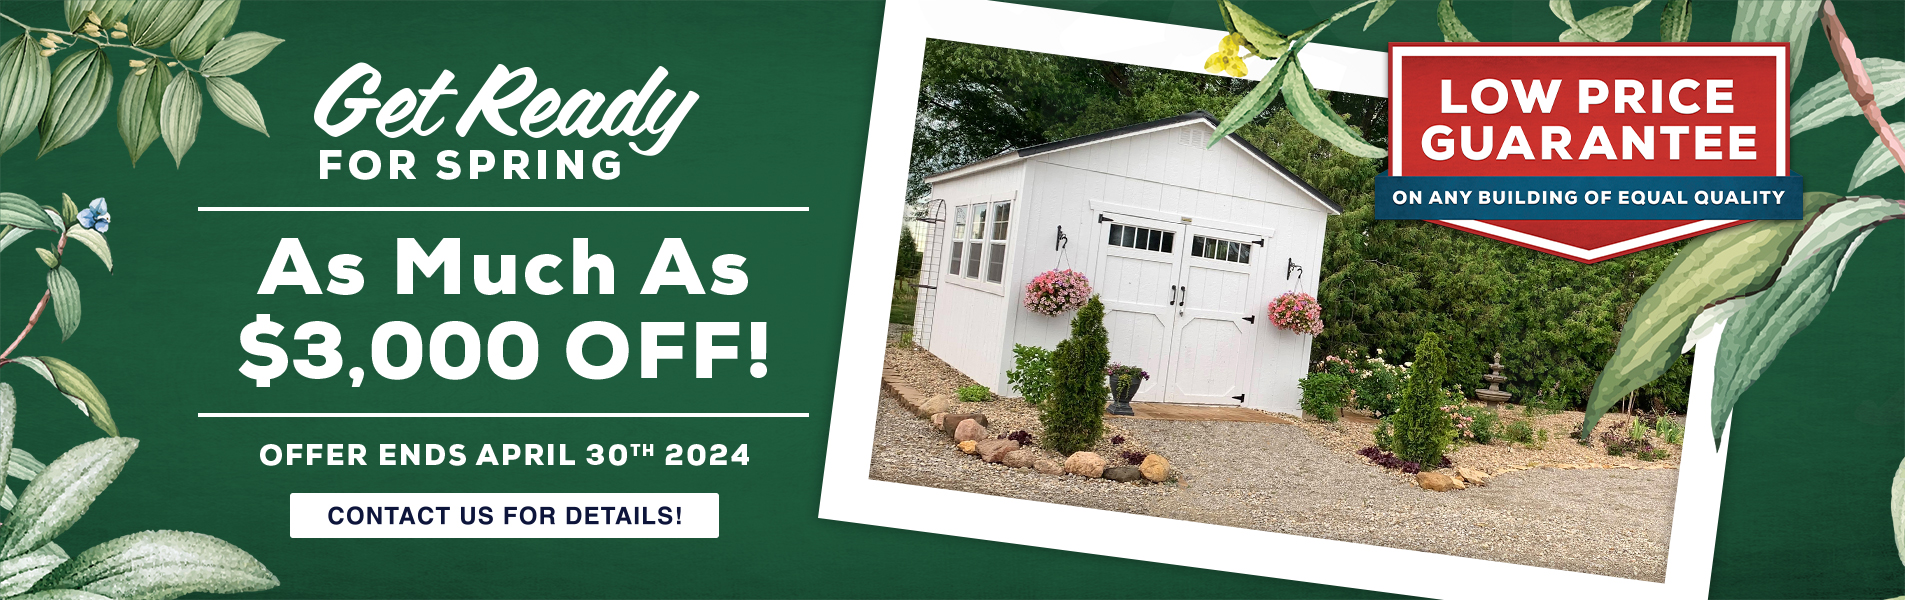 April Savings Spring Building Shed Sales Event for shed sales at French Creek Shed Sales in Casper, WY Sheds up to $3000.00 off!